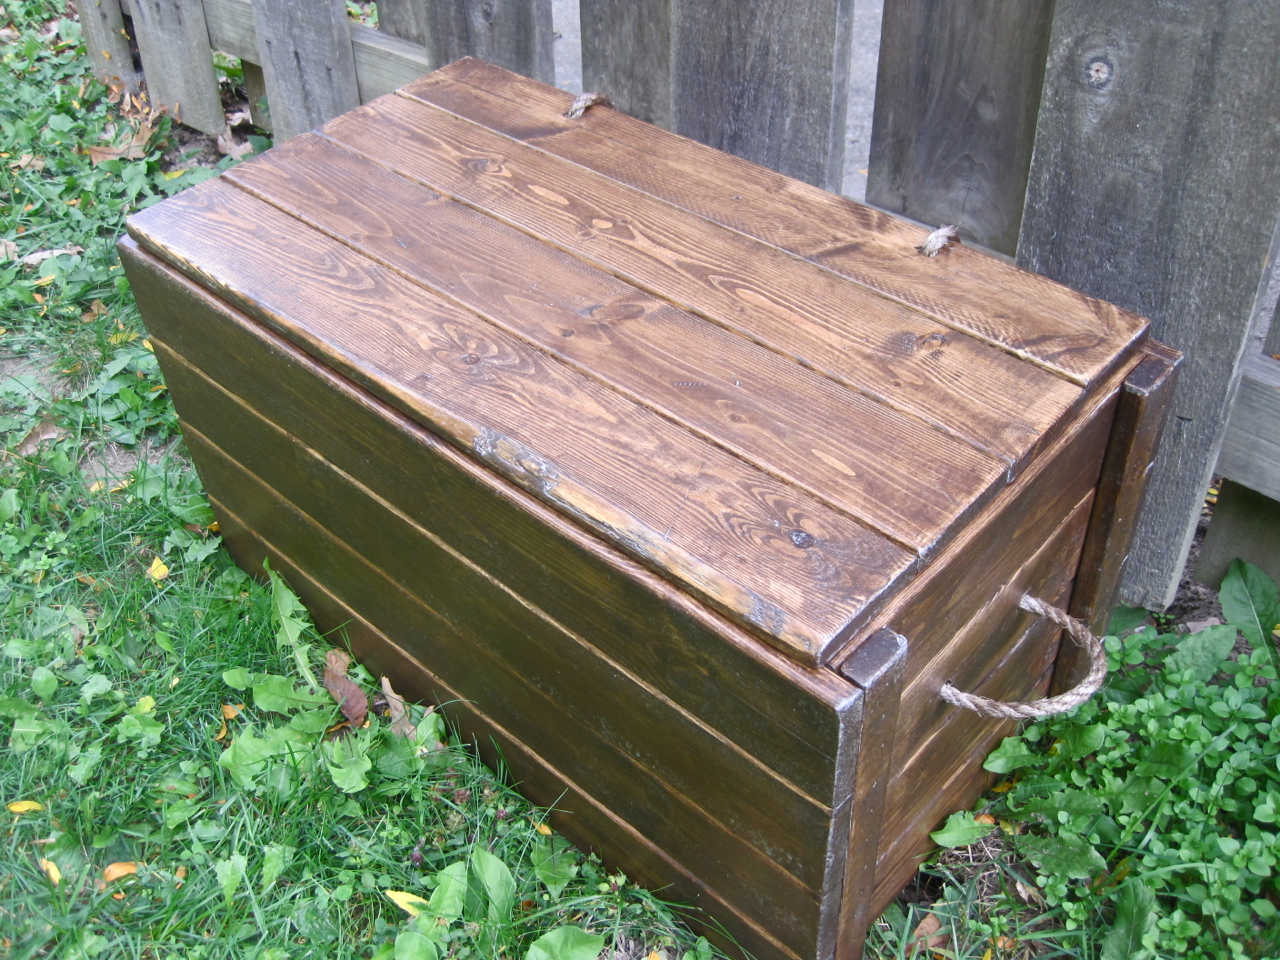 The Project Lady: Wood Storage Chest - Make your own!